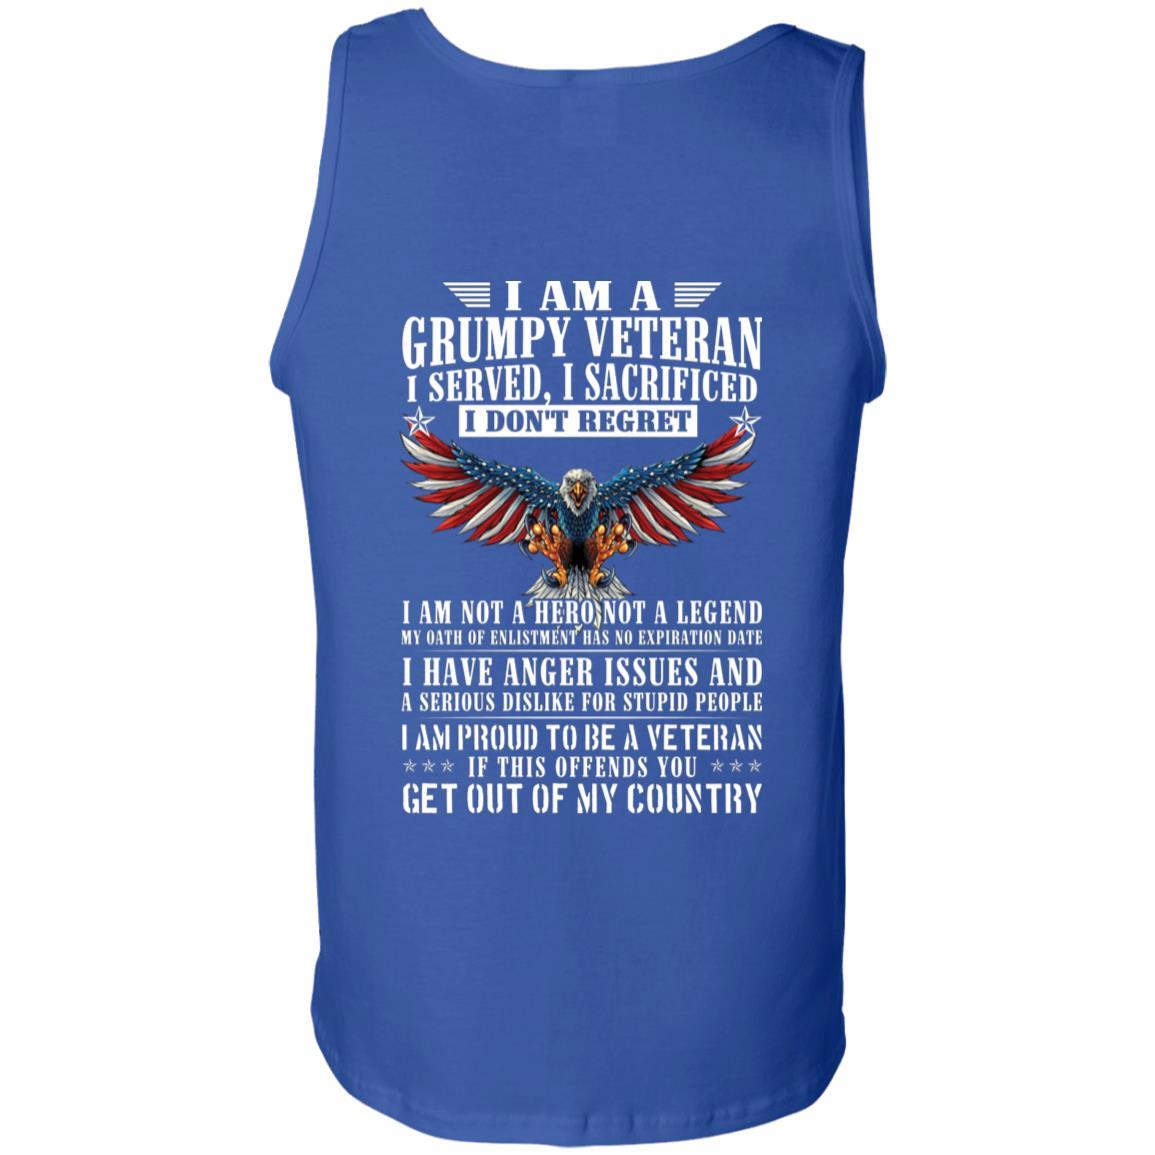 Military T-Shirt "I Am A Grumpy Veteran - Get Out Of My Country Men" On Back-TShirt-General-Veterans Nation